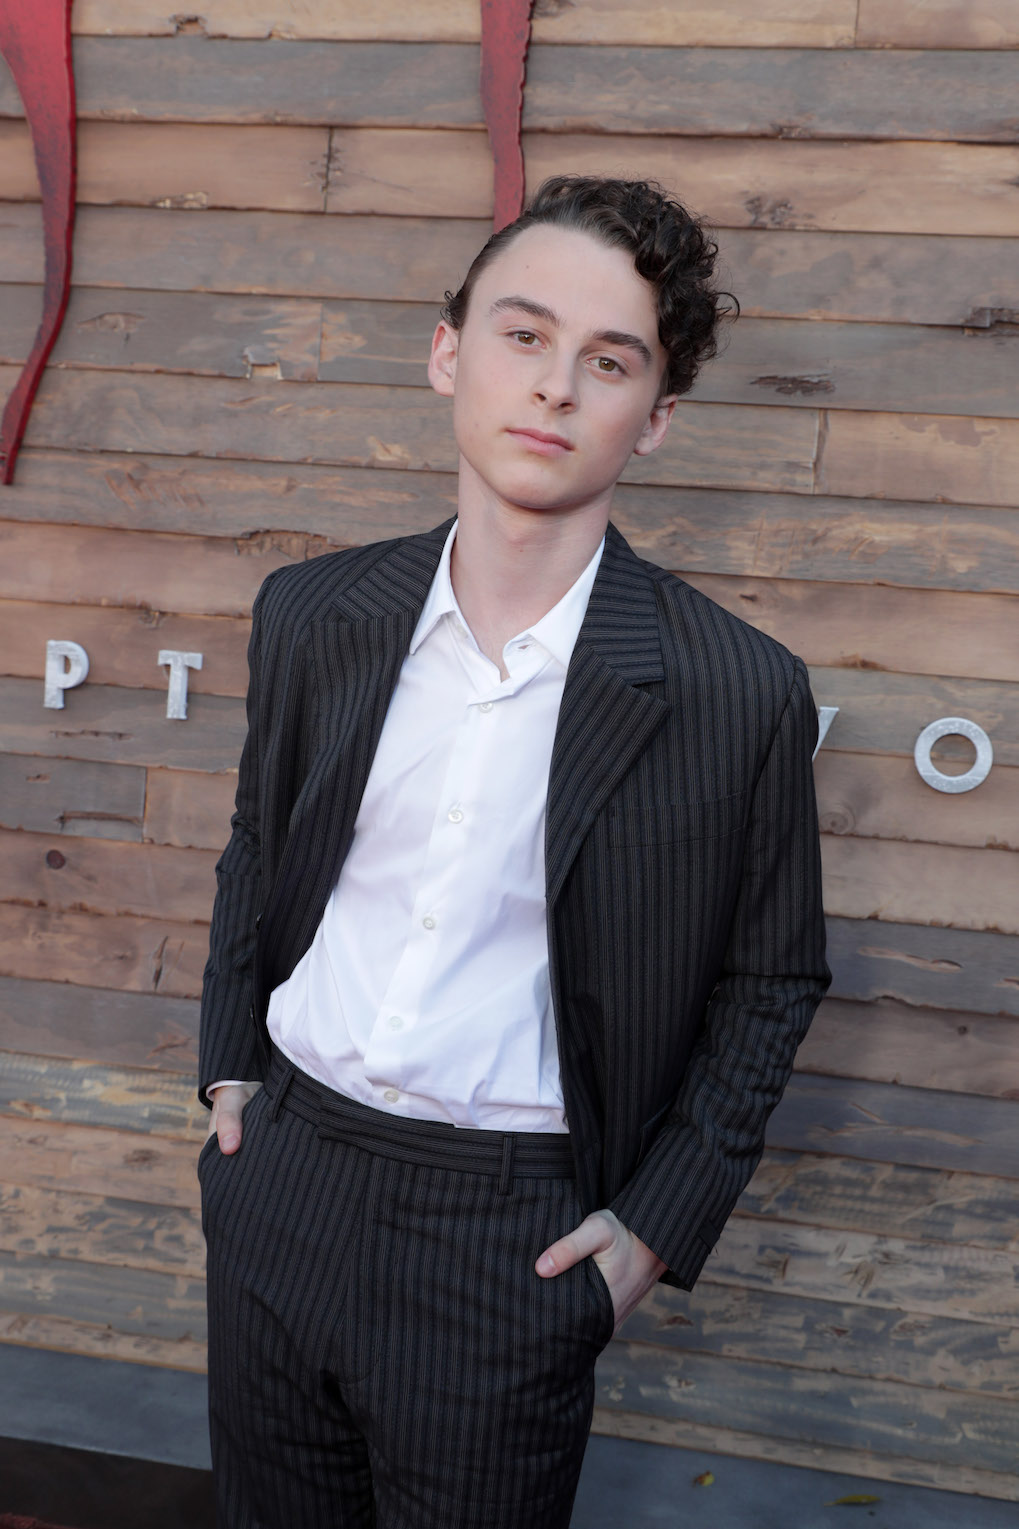 Wyatt Oleff wearing Prada at the premier of 'IT: Chapter Two'